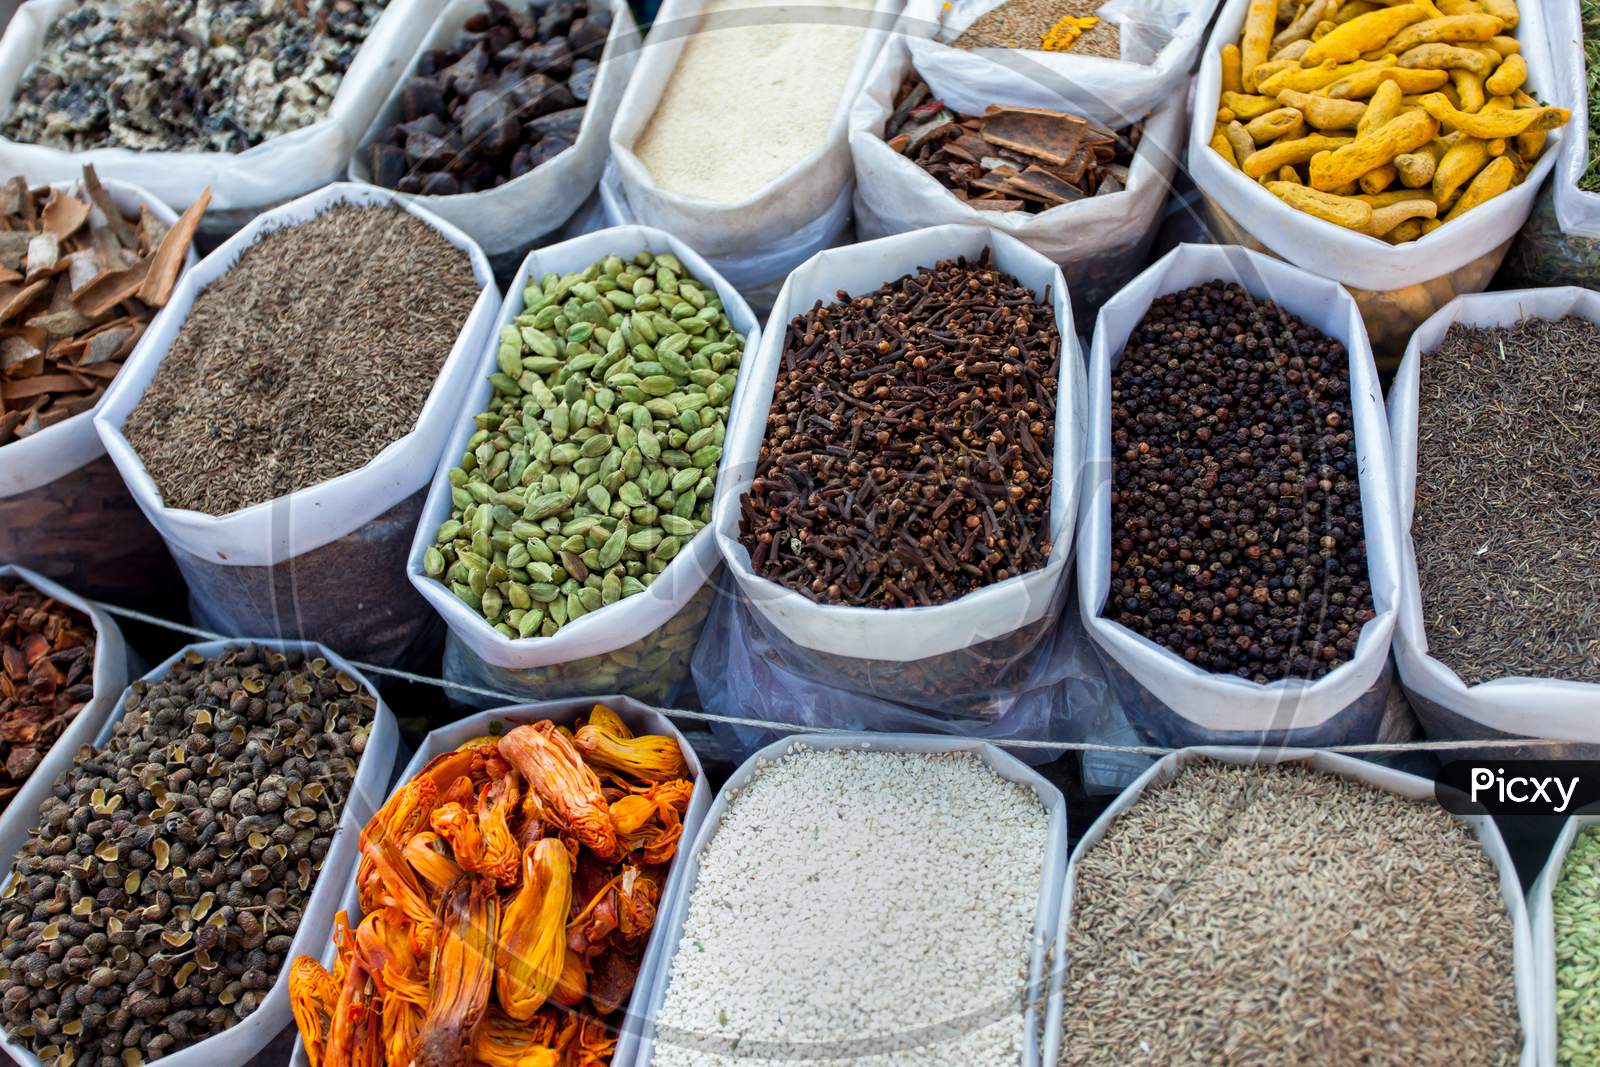 Indian S Various Spices For Sell In Market